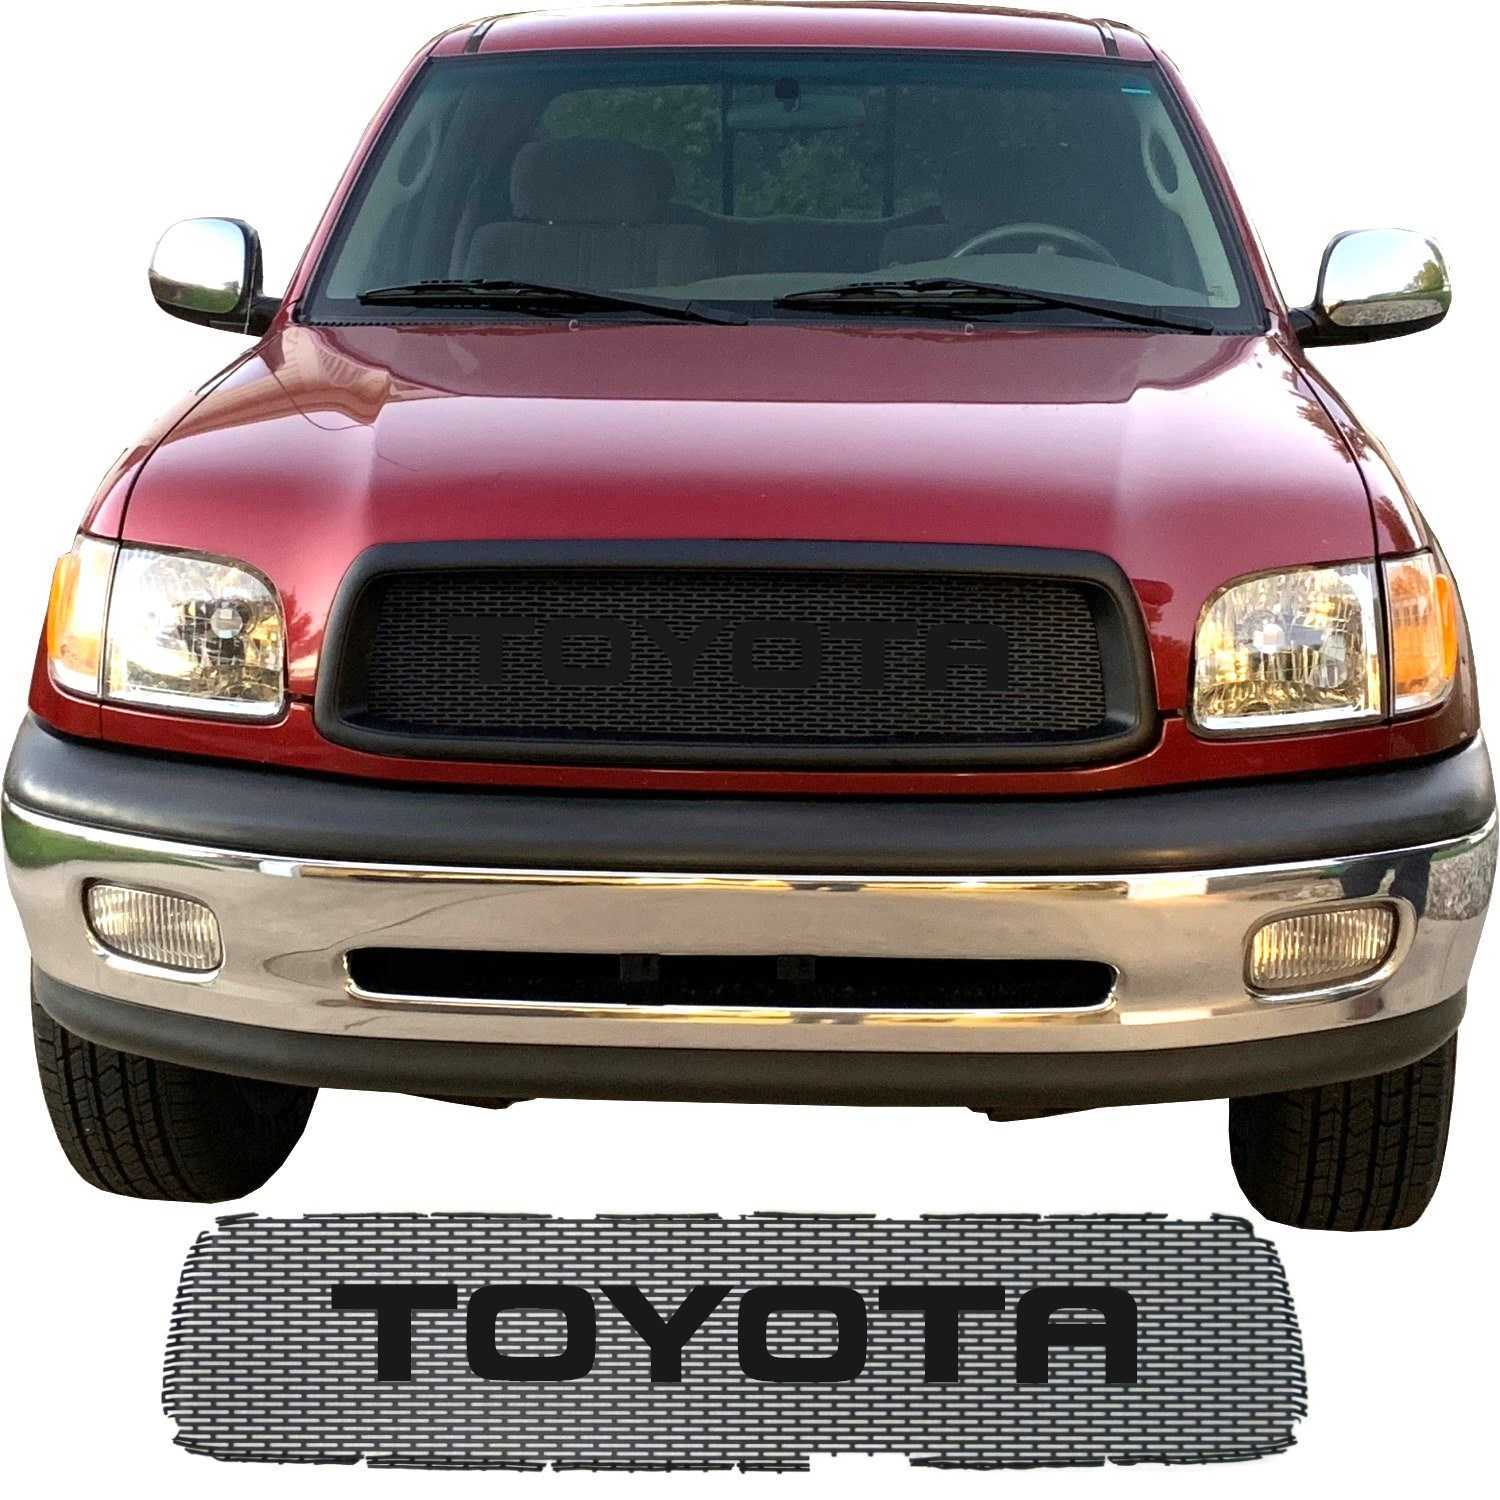 2000 - 2002 Toyota Tundra Grill Mesh with Big Lettering